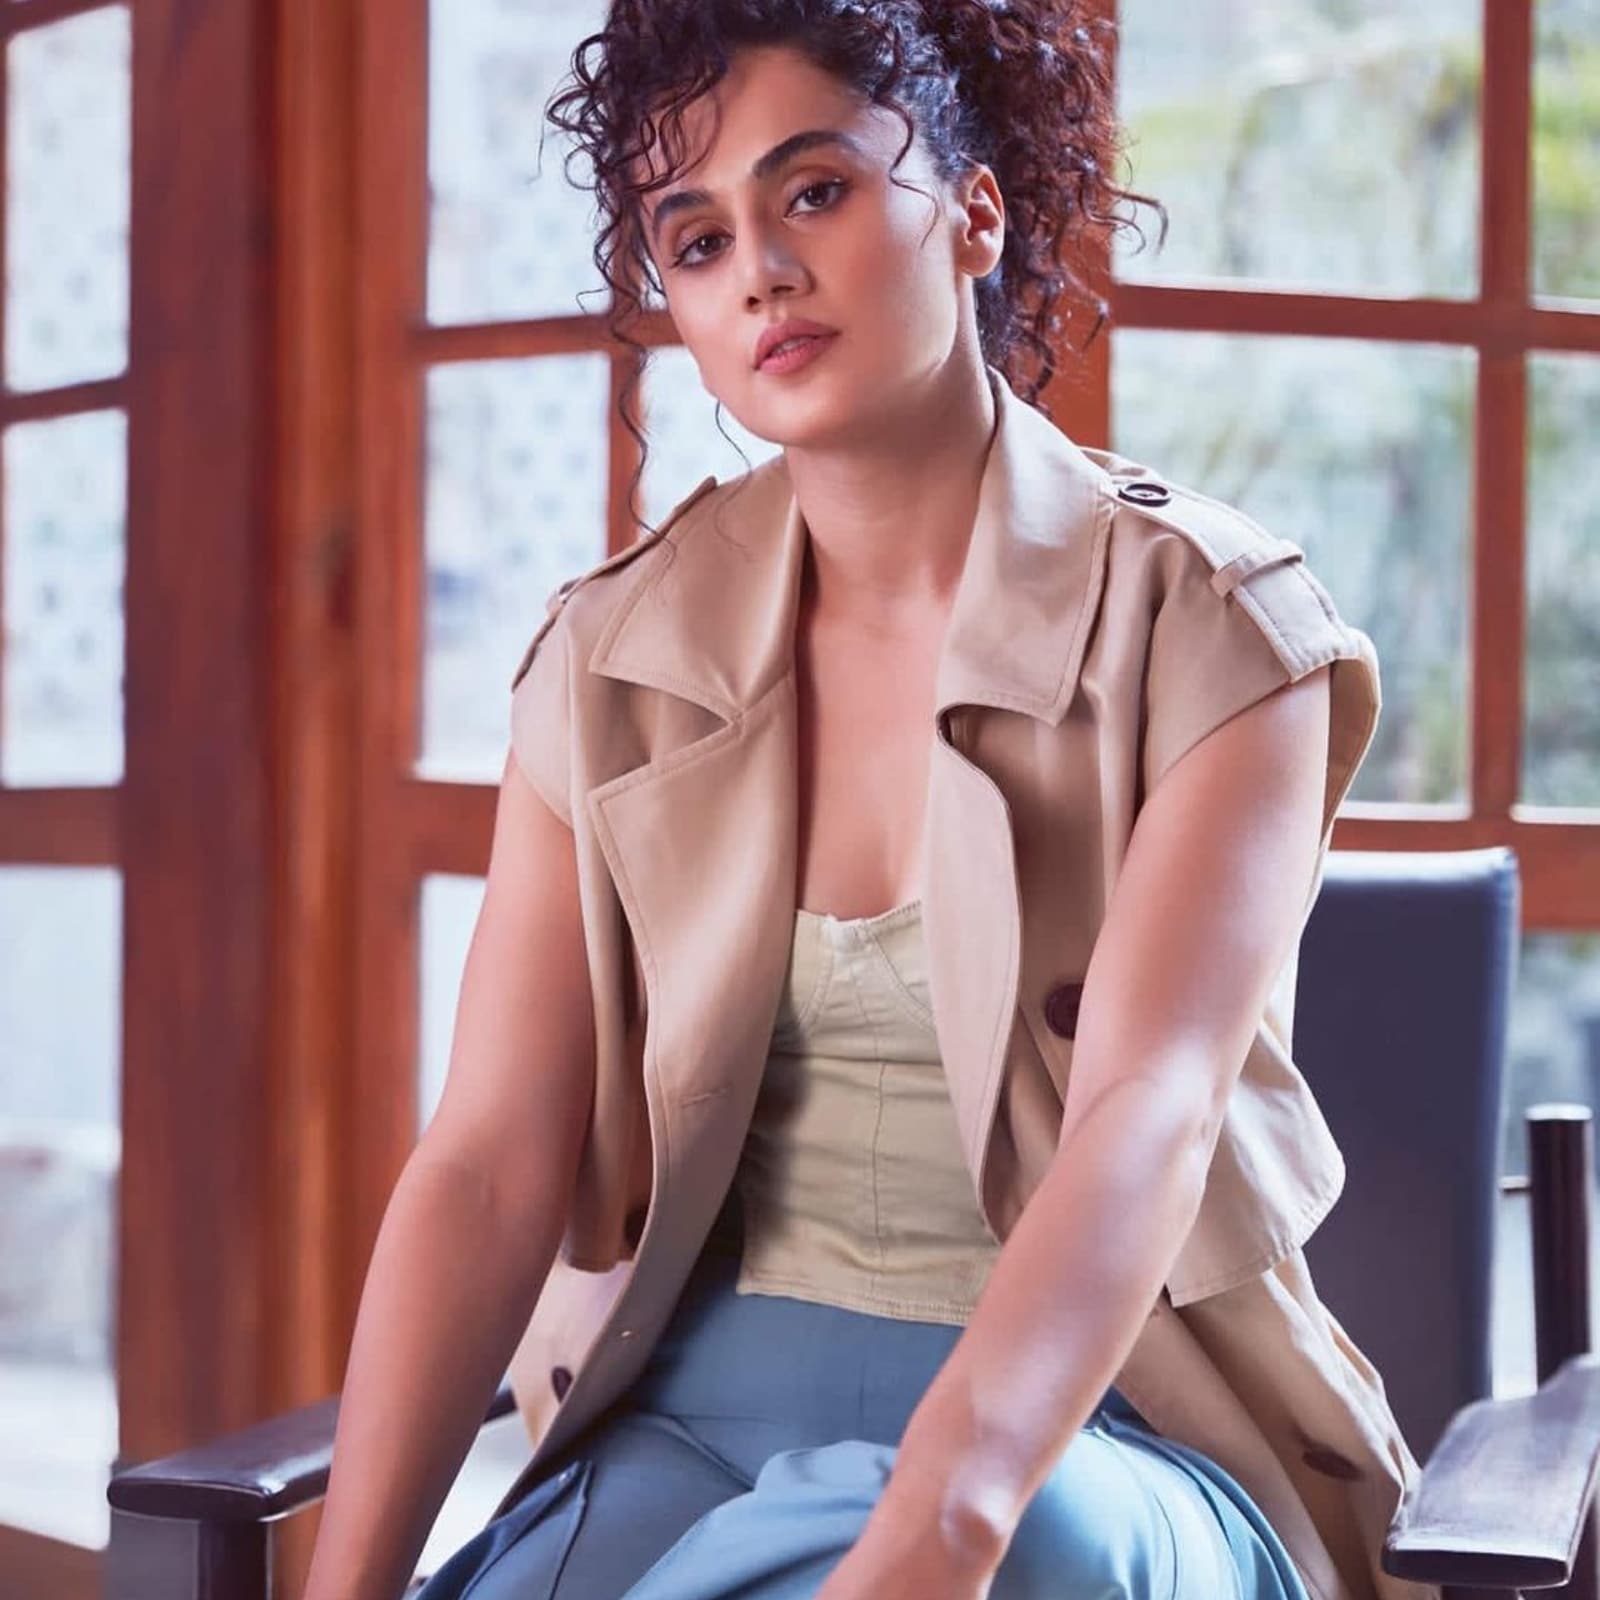 Taapsee Pannu Hard Xxx - Taapsee Pannu Appears In Bade Acche Lagte Hain 2 for Dobaaraa Promotions:  'New Experience For Me' - News18